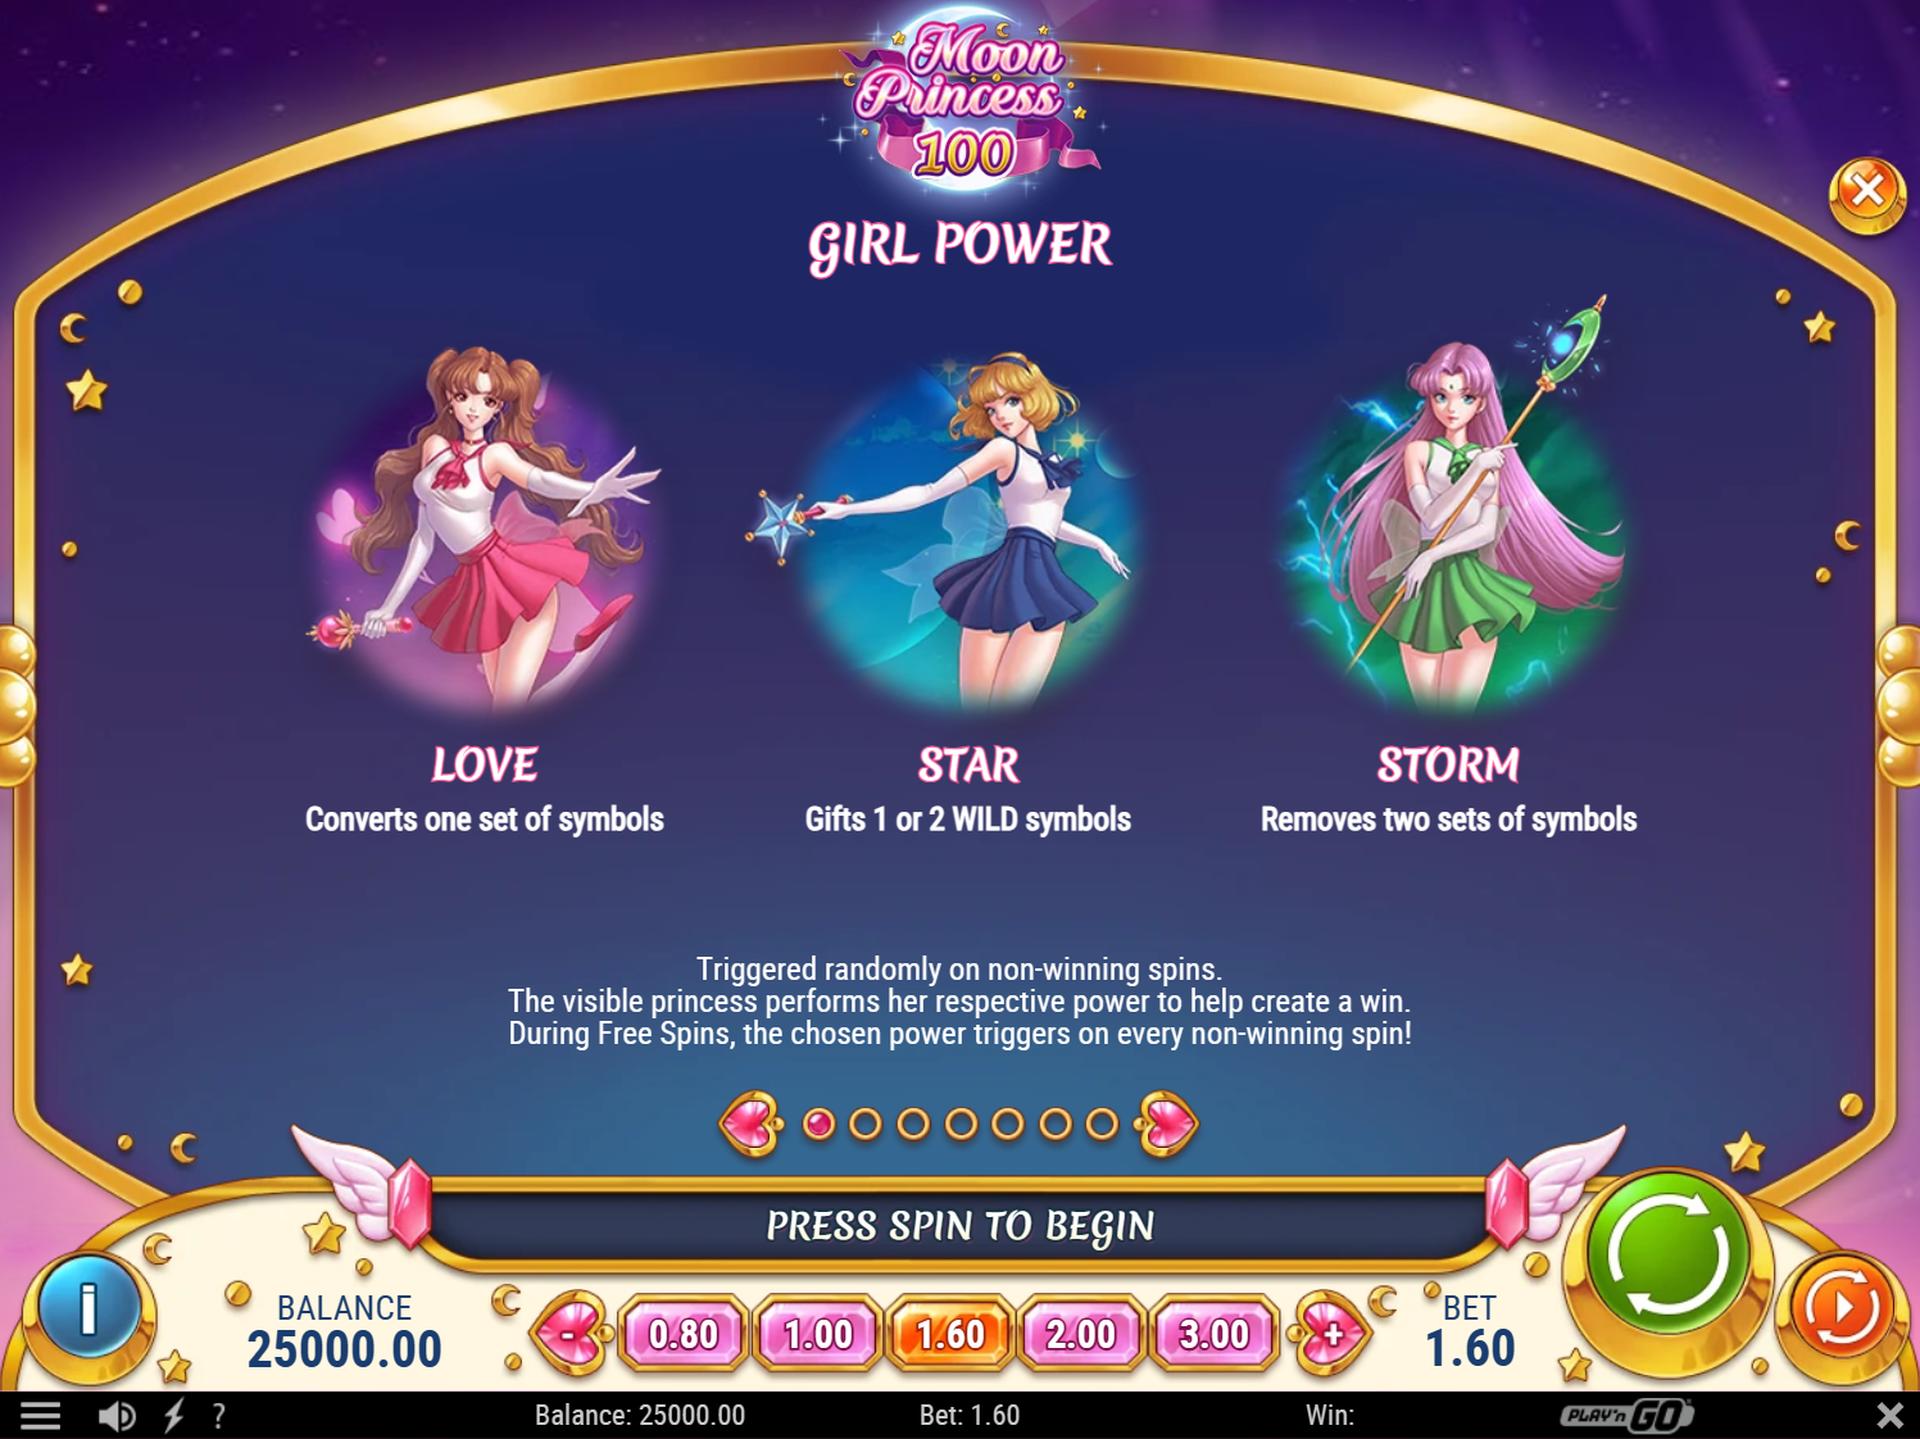 Girl Power feature